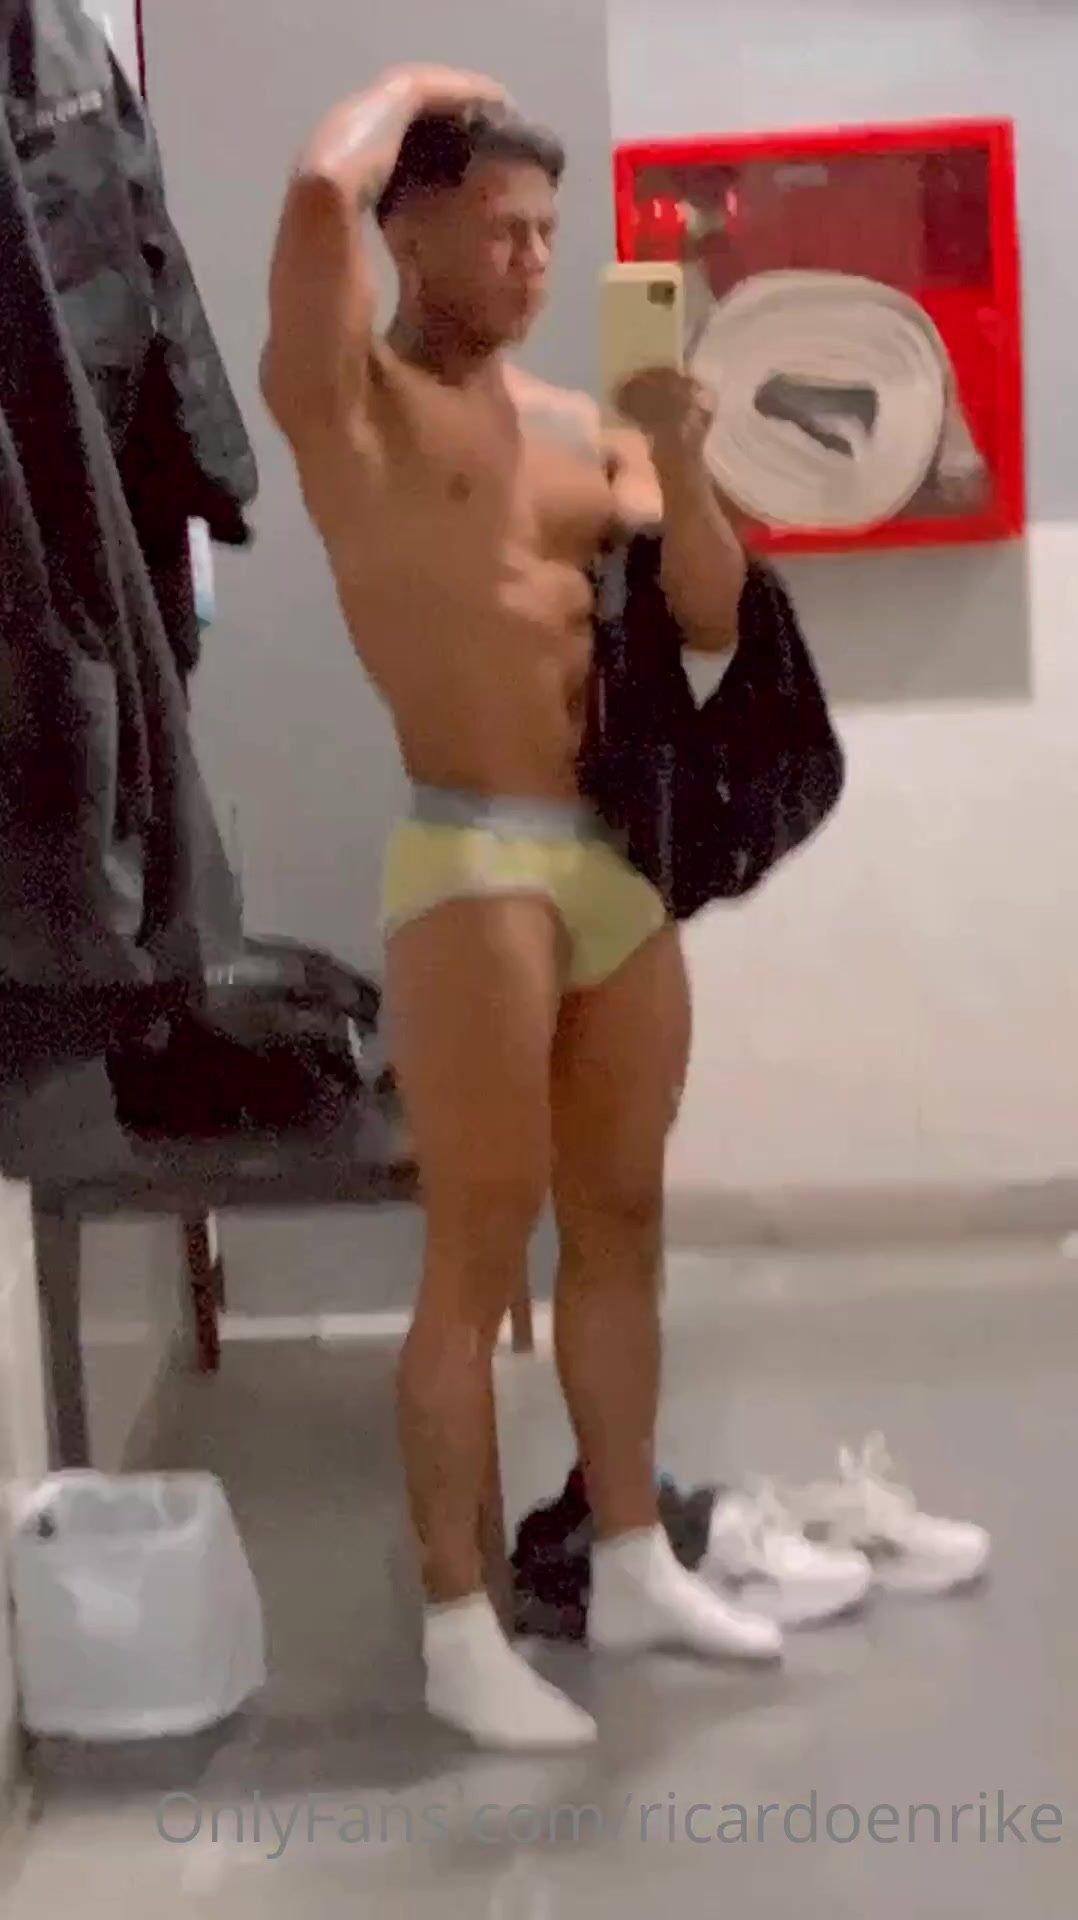 Instagram Latin Boy Shows Bulges and Takes Shower pic